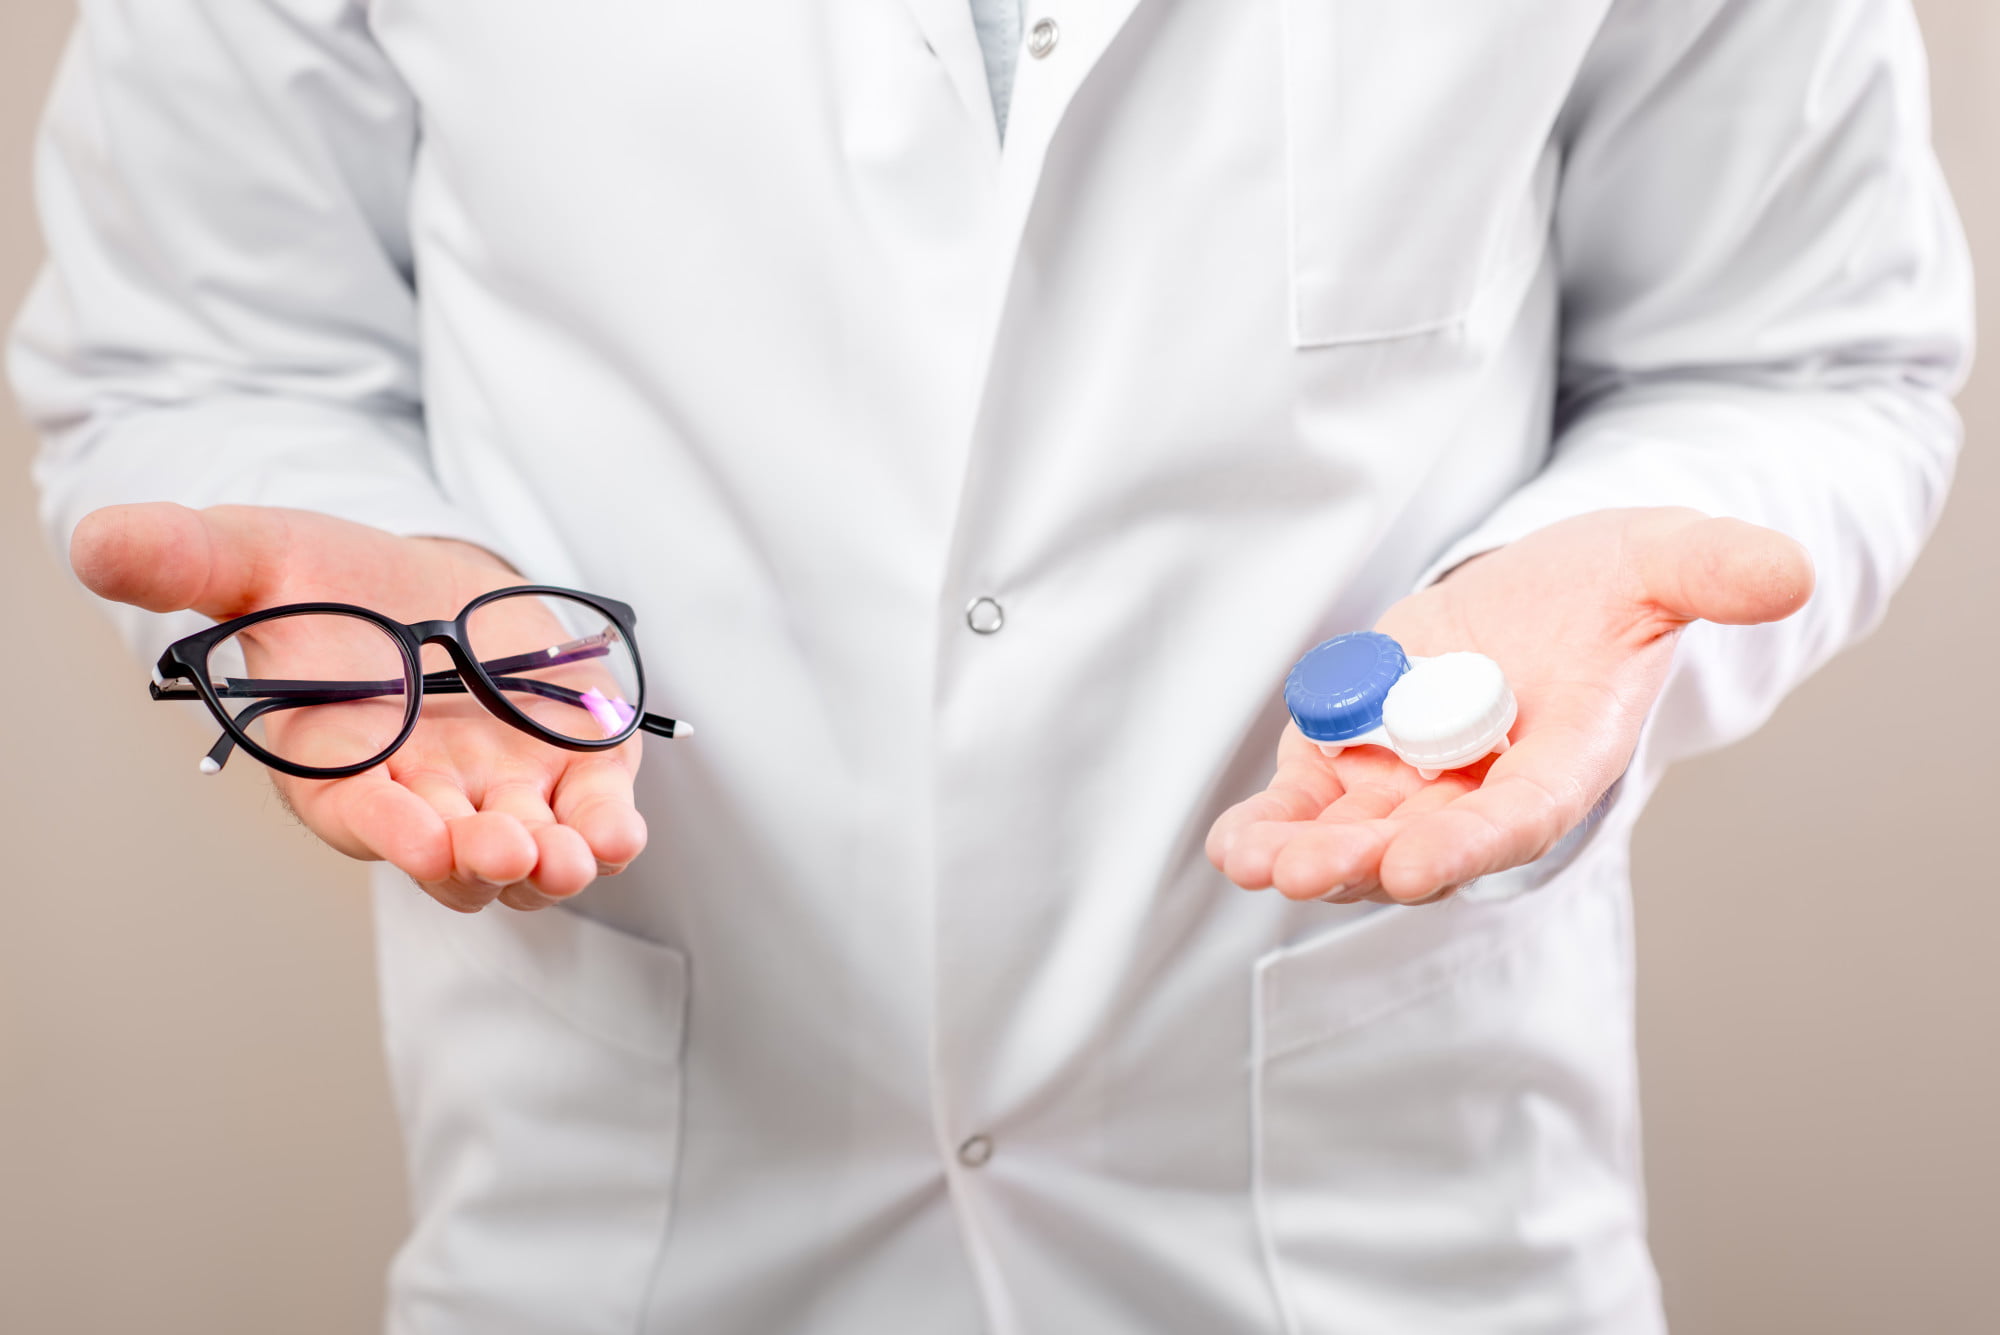 Are you trying to decide between glasses vs. contacts? This is how to decide which vision solution is best for your needs.